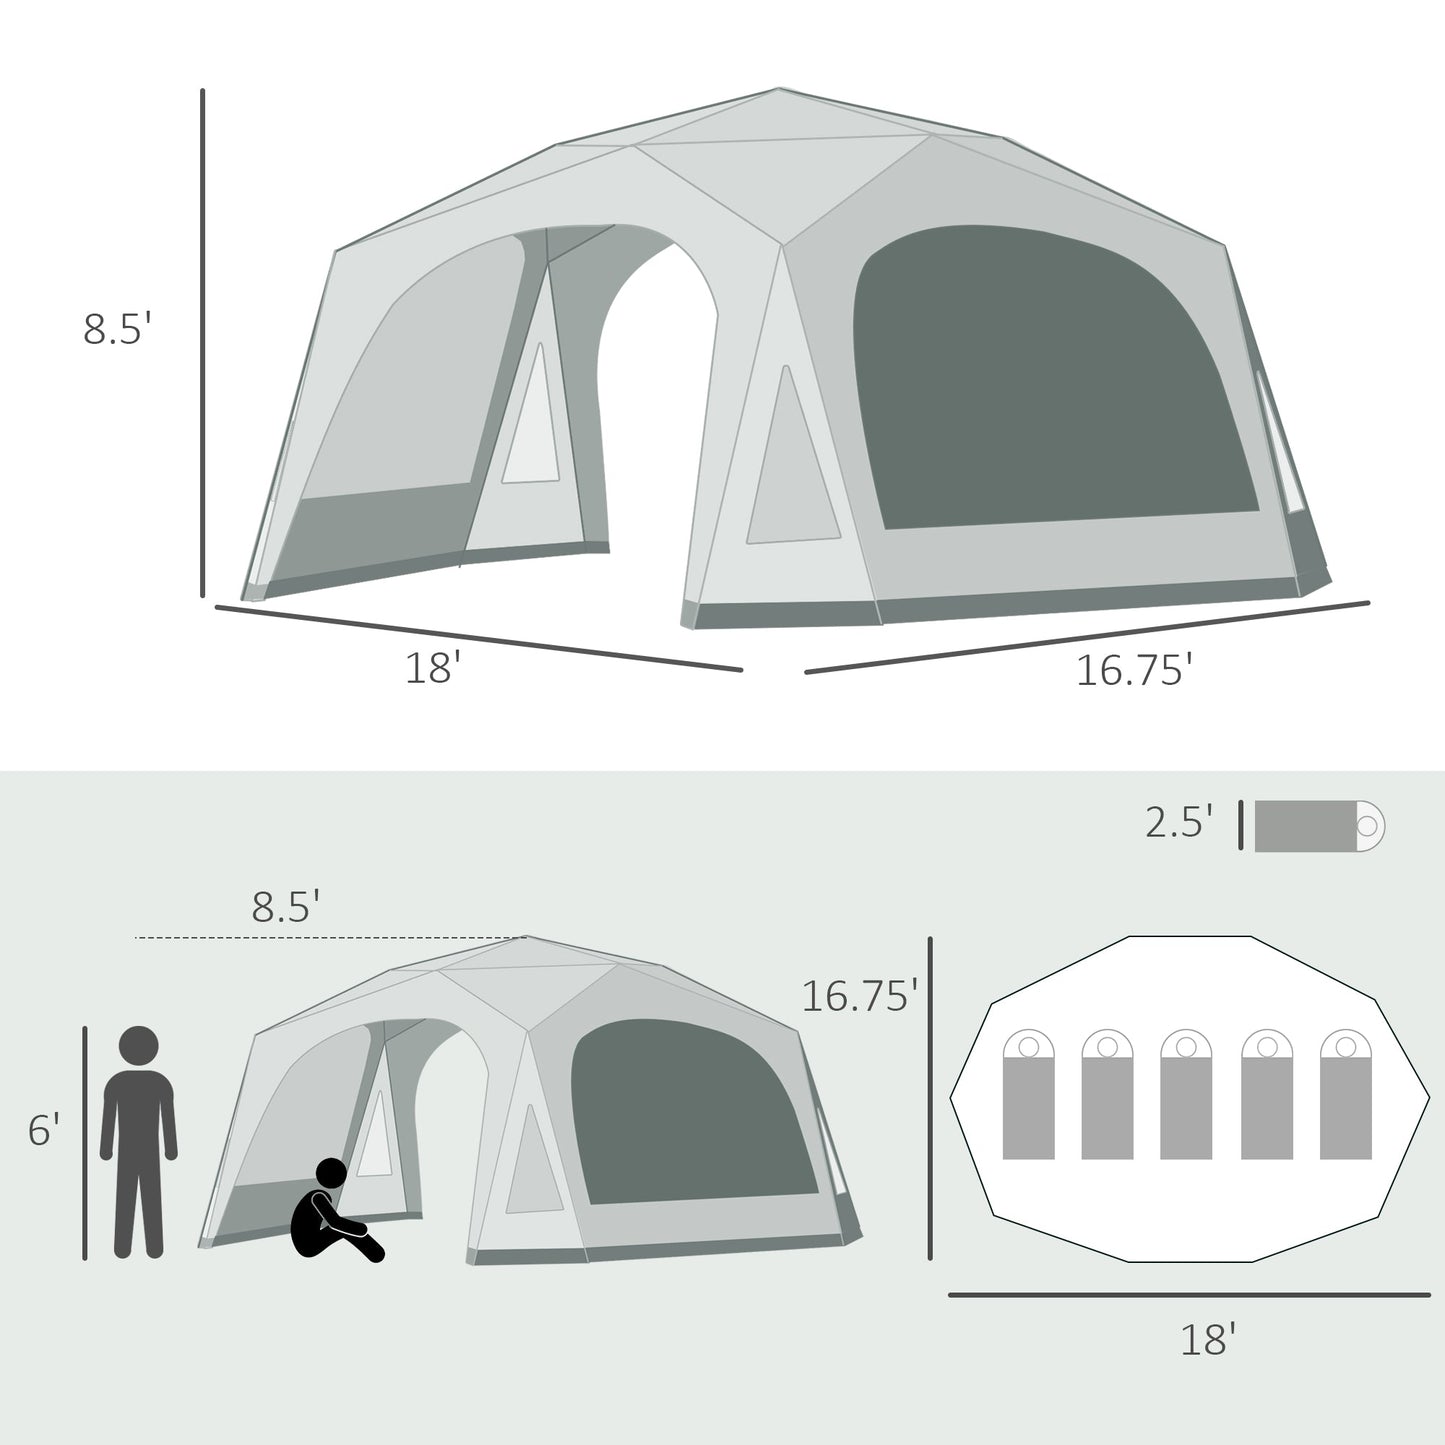 Miscellaneous-20-Man Large Camping Tents with Weatherproof Cover, Backpacking Family Tent with 8 Mesh Windows 2 Doors - Cream White - Outdoor Style Company